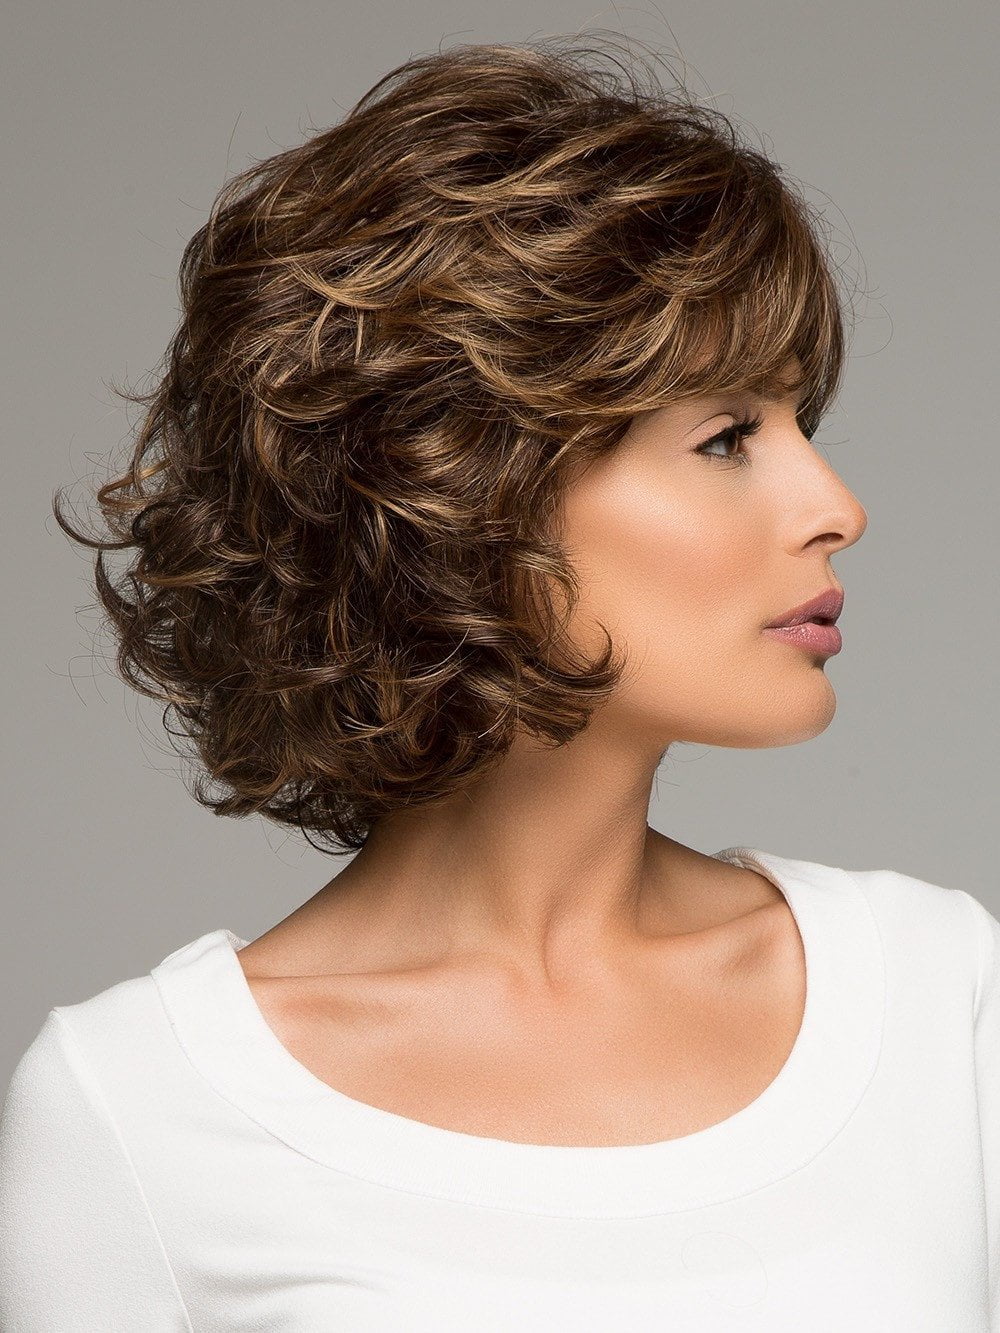 Mariah by Noriko is simply elegant, a beautiful chin length Bob with soft tousled curls.